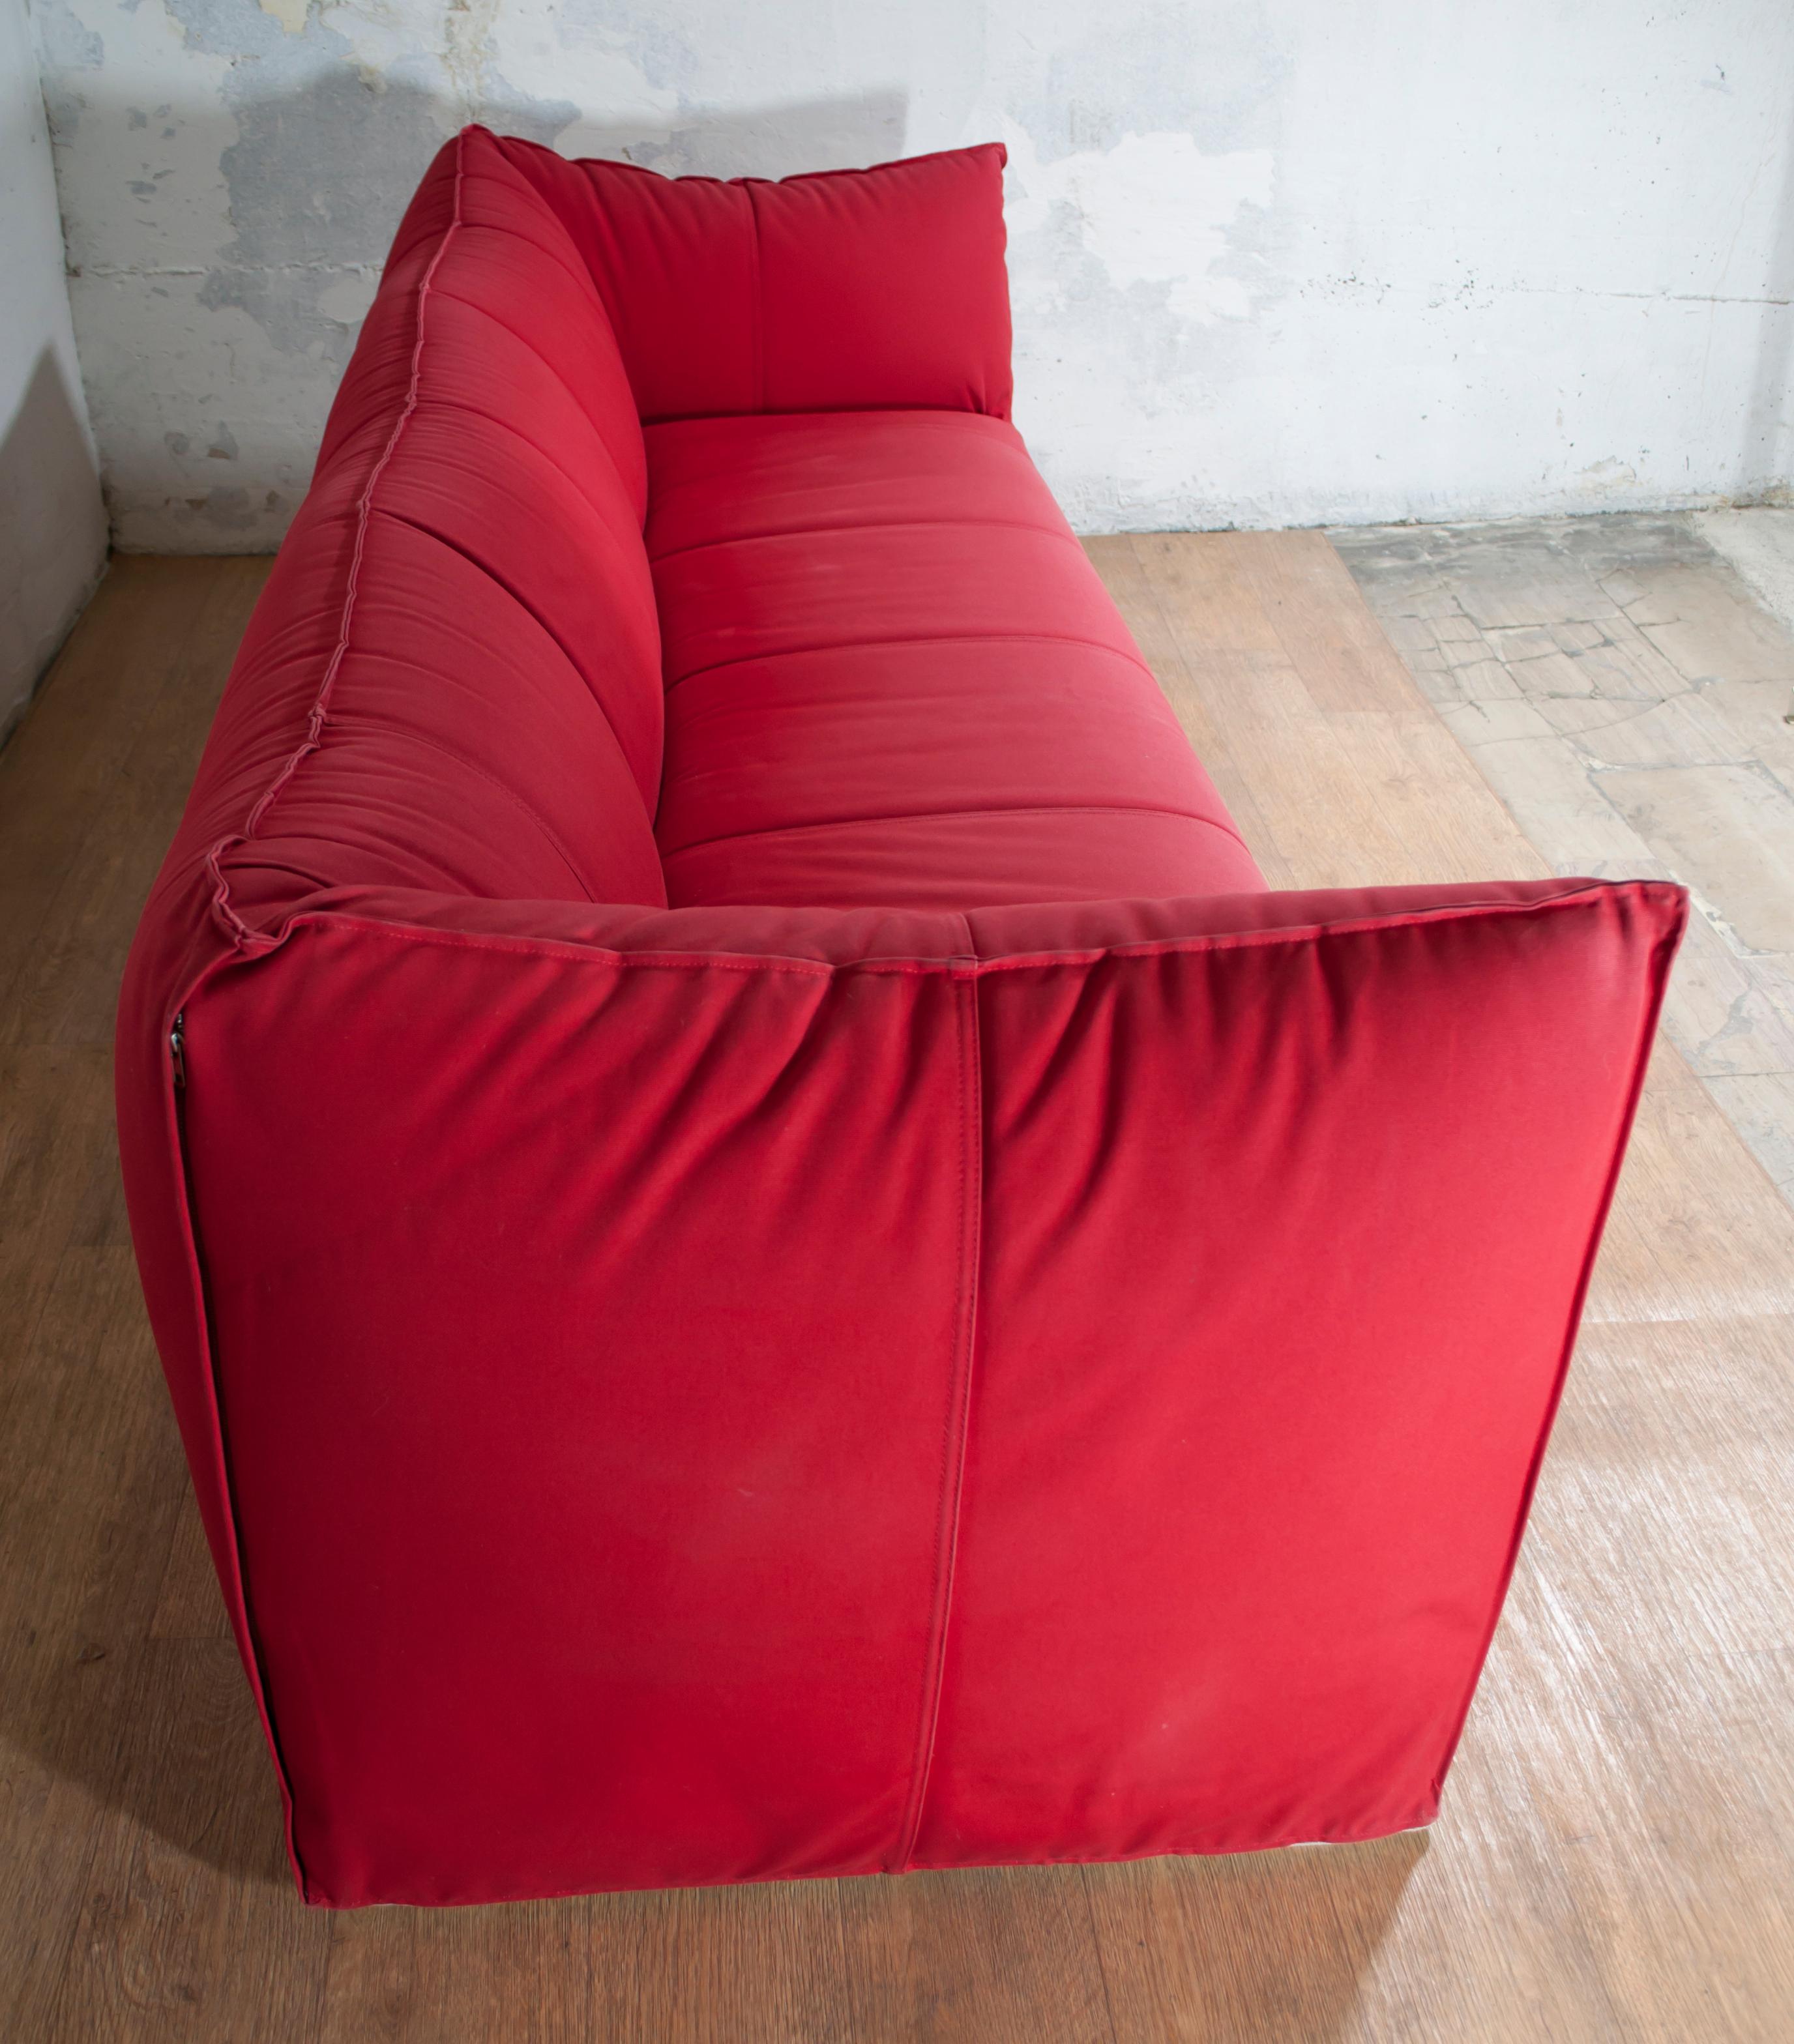 Mario Bellini Sofa and Pouf Tribambola Red Canvas Lining 